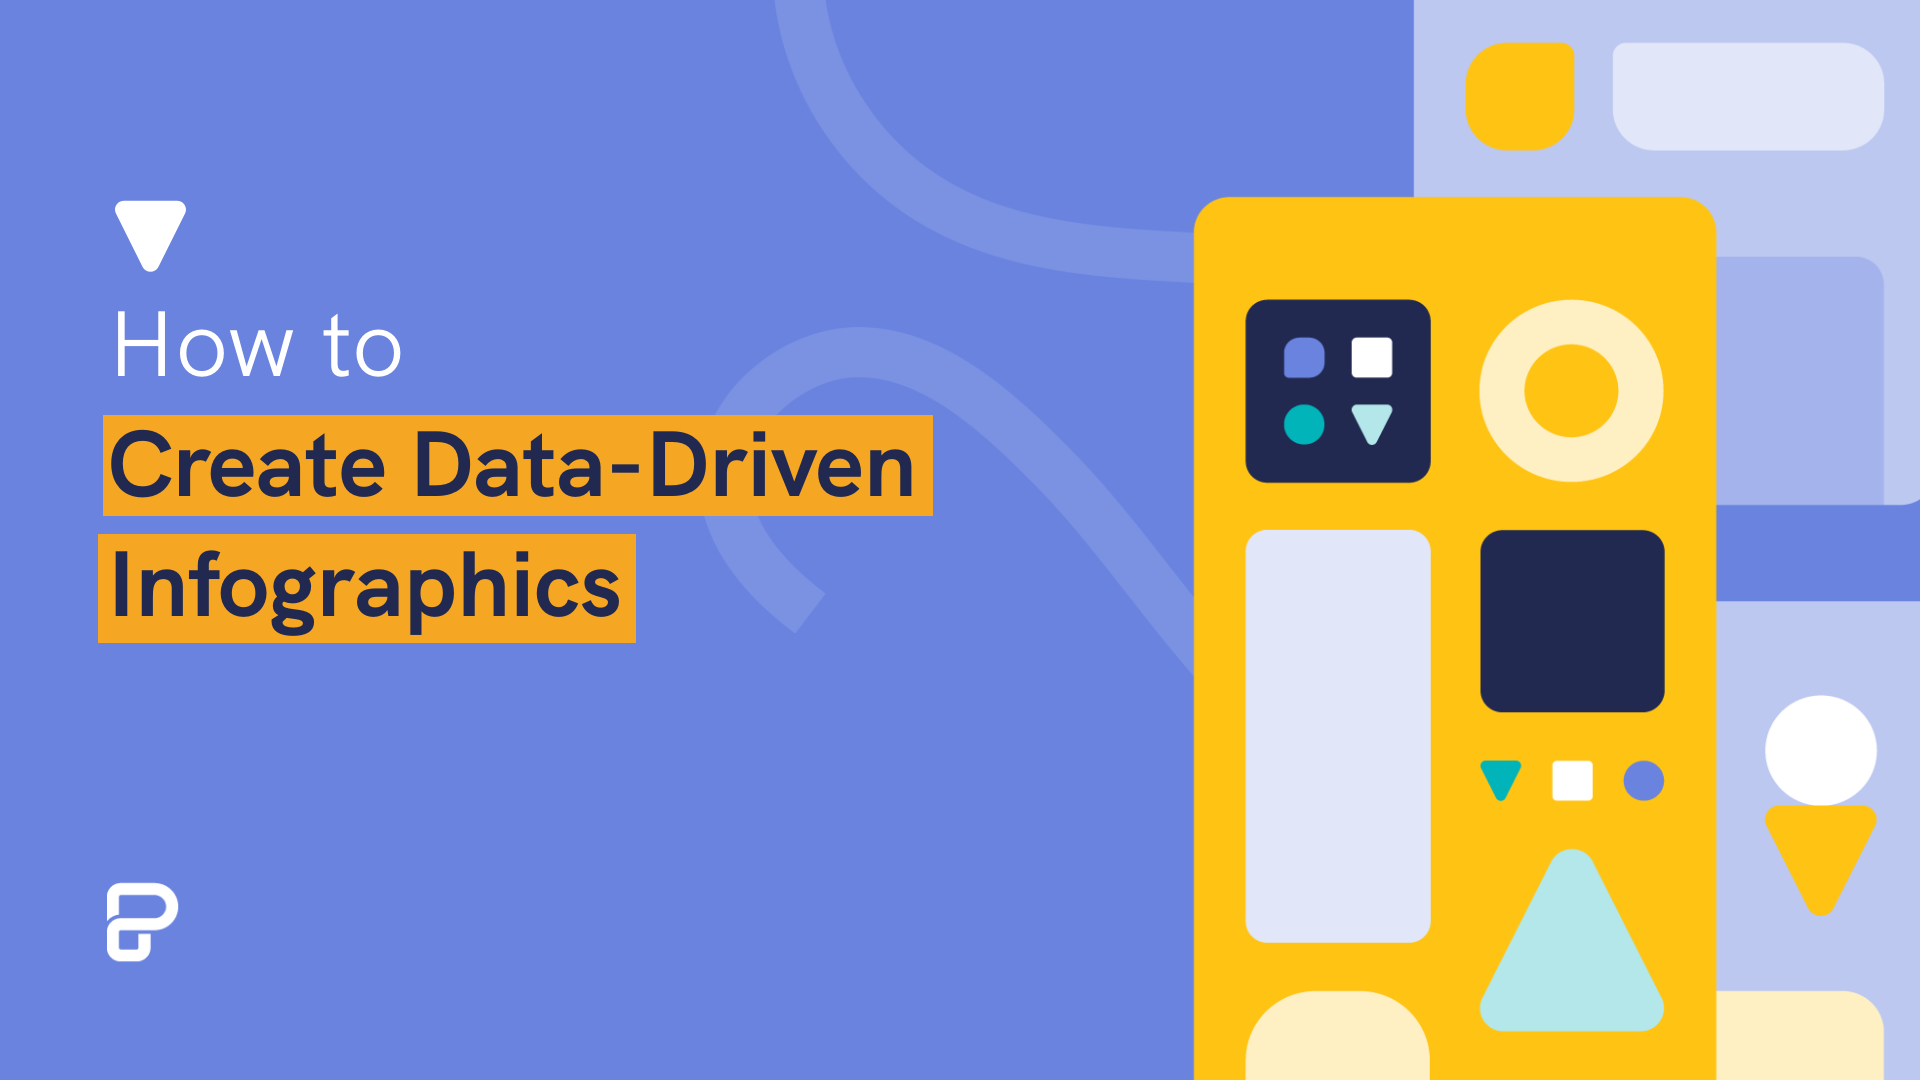 infographic, data-driven infographic, create infographic